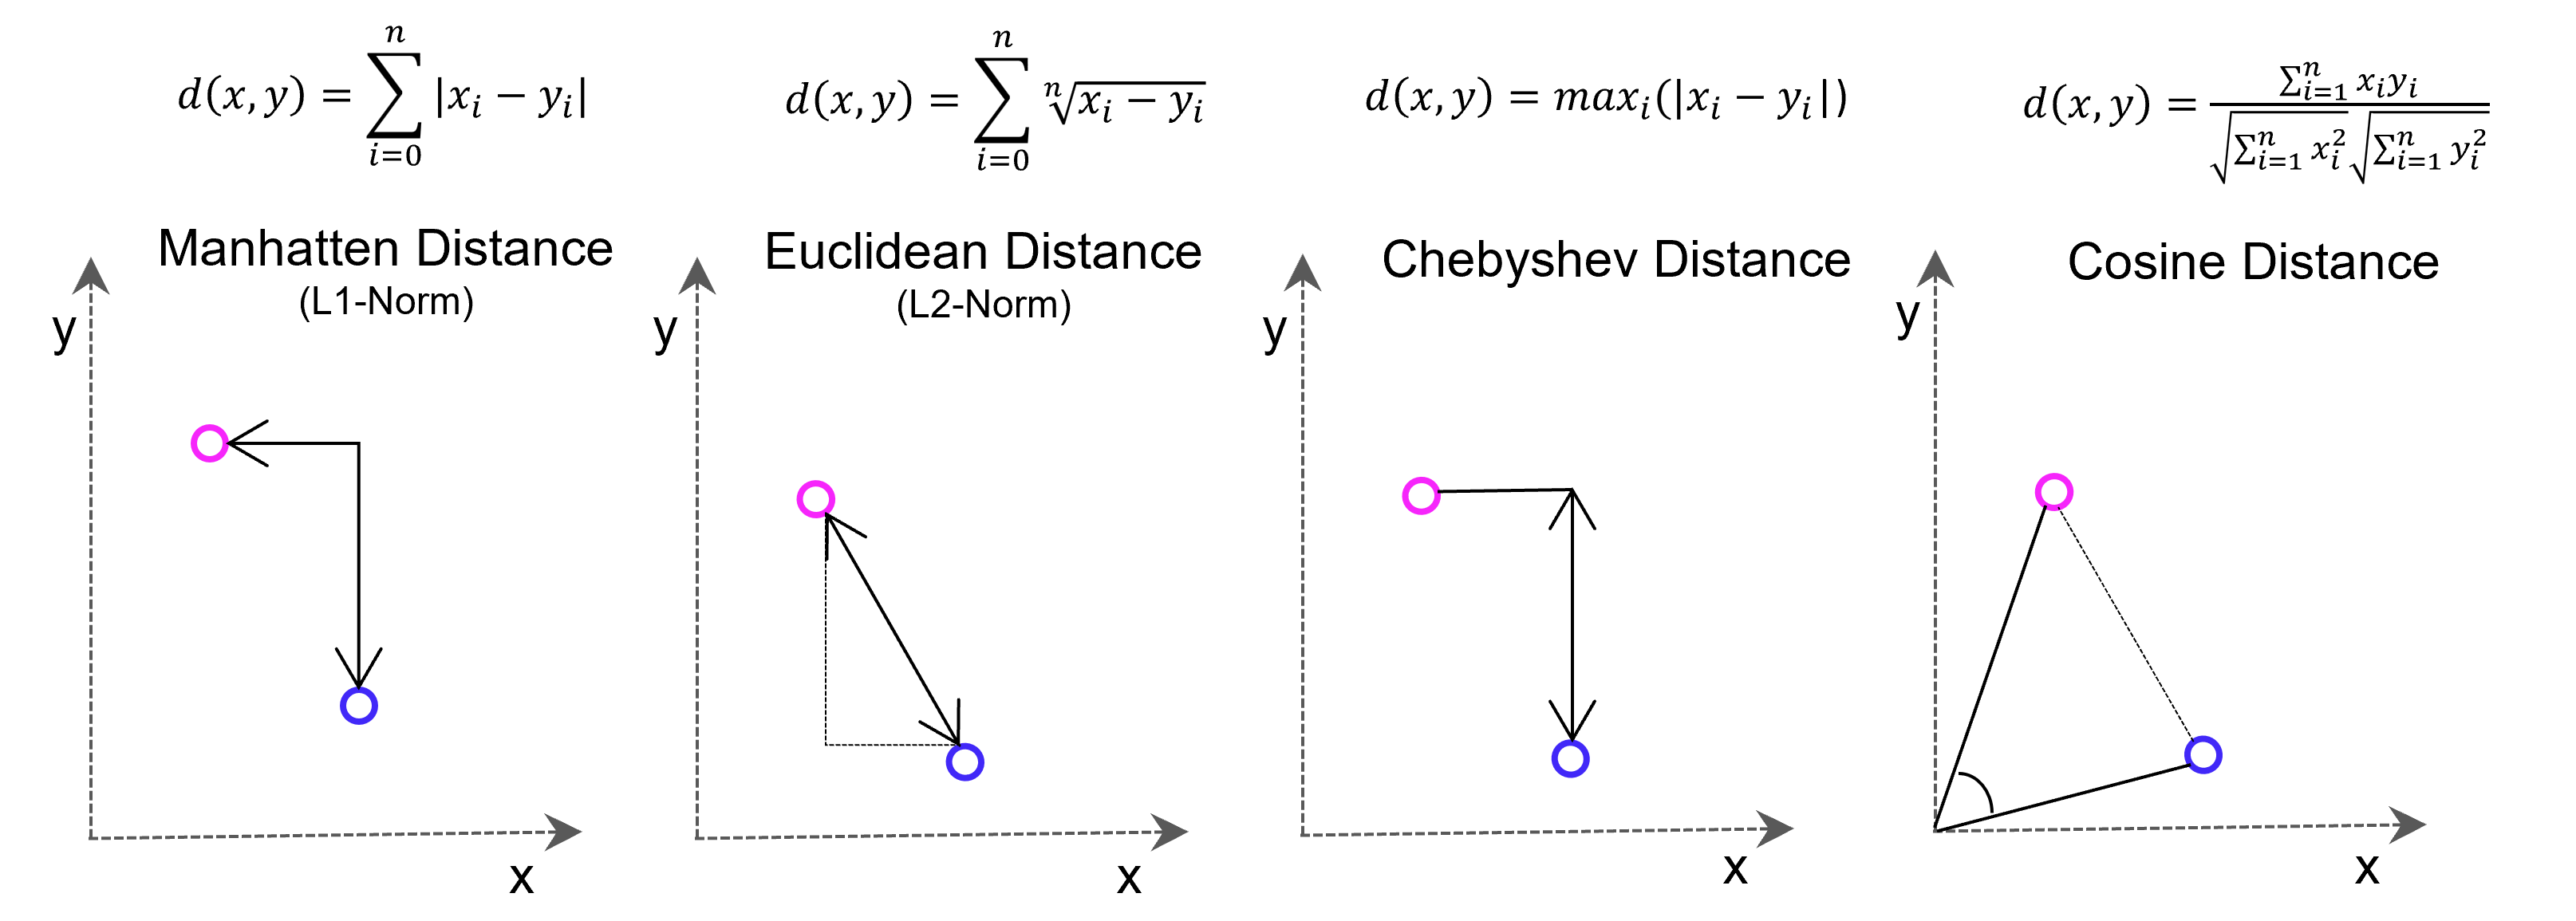 Vectore-based distance measuring methods: Euclidean Distance L2-Norm, Manhatten Distance L1-Norm, Chebyshev Distance and Cosine Distance